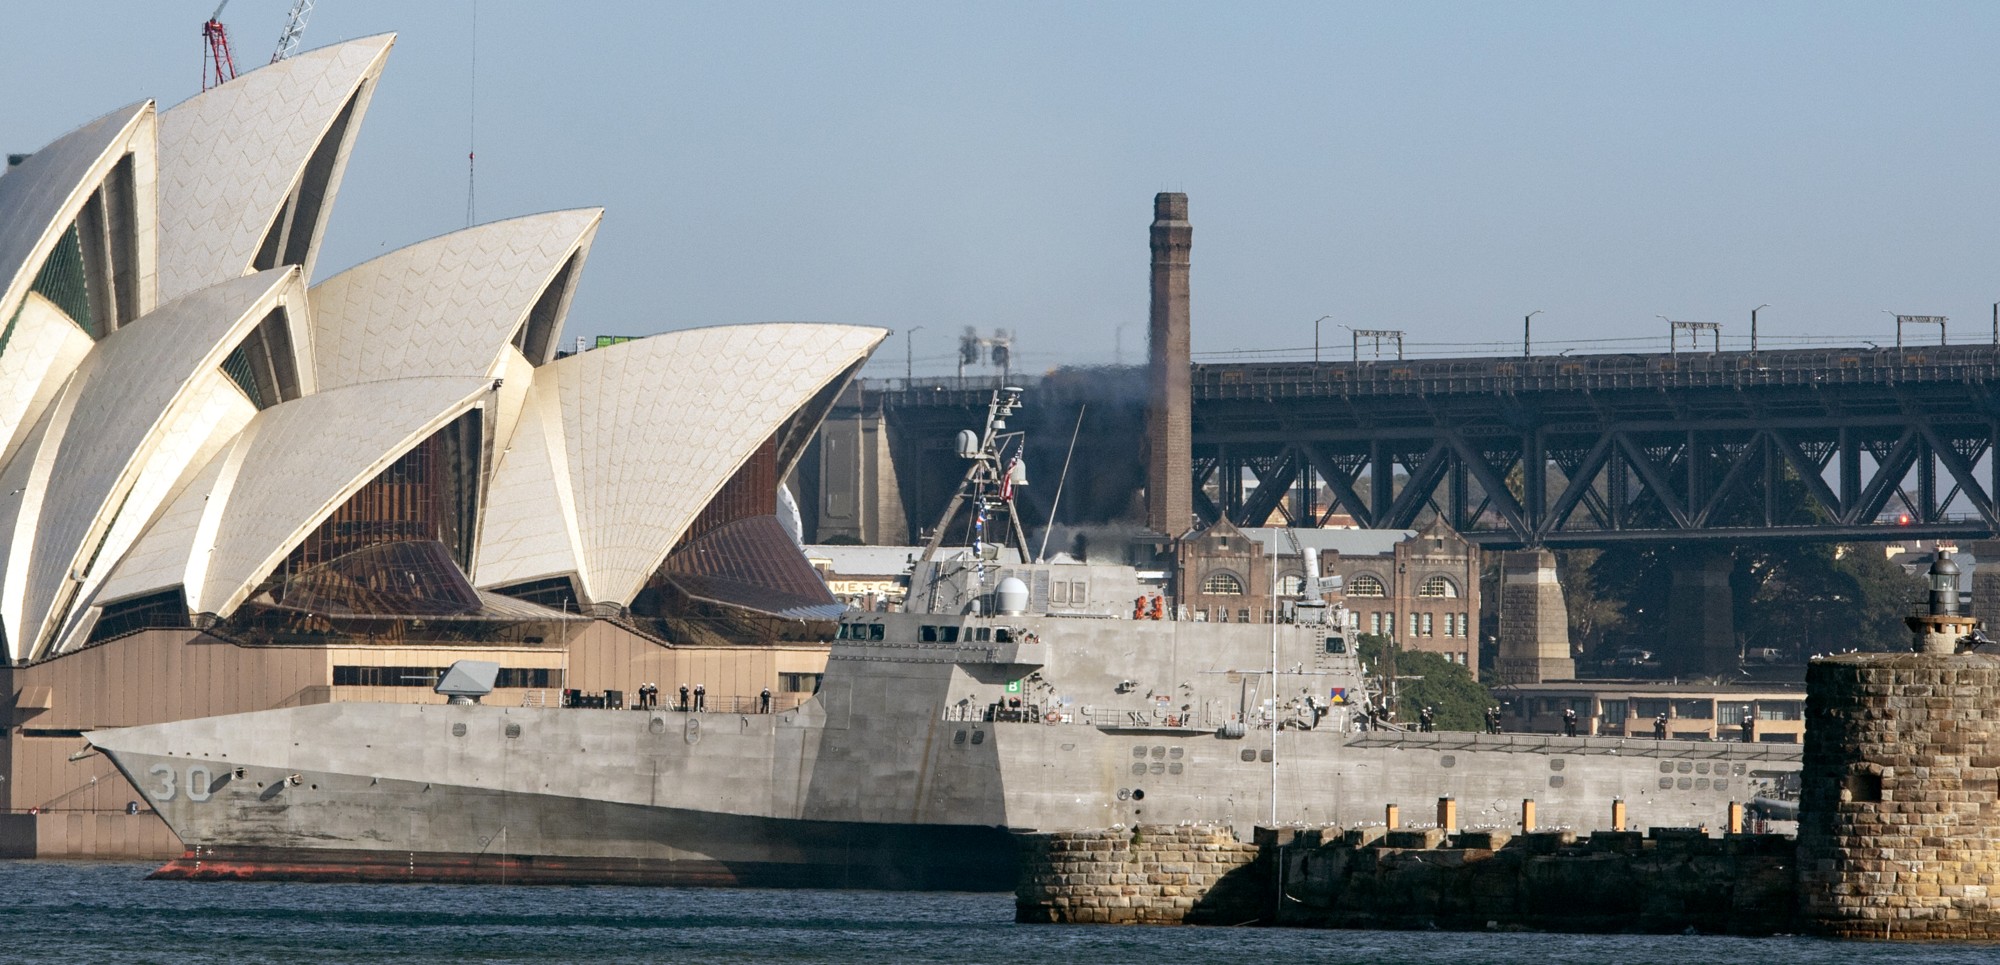 lcs-30 uss canberra littoral combat ship independence class us navy sydney harbor 18